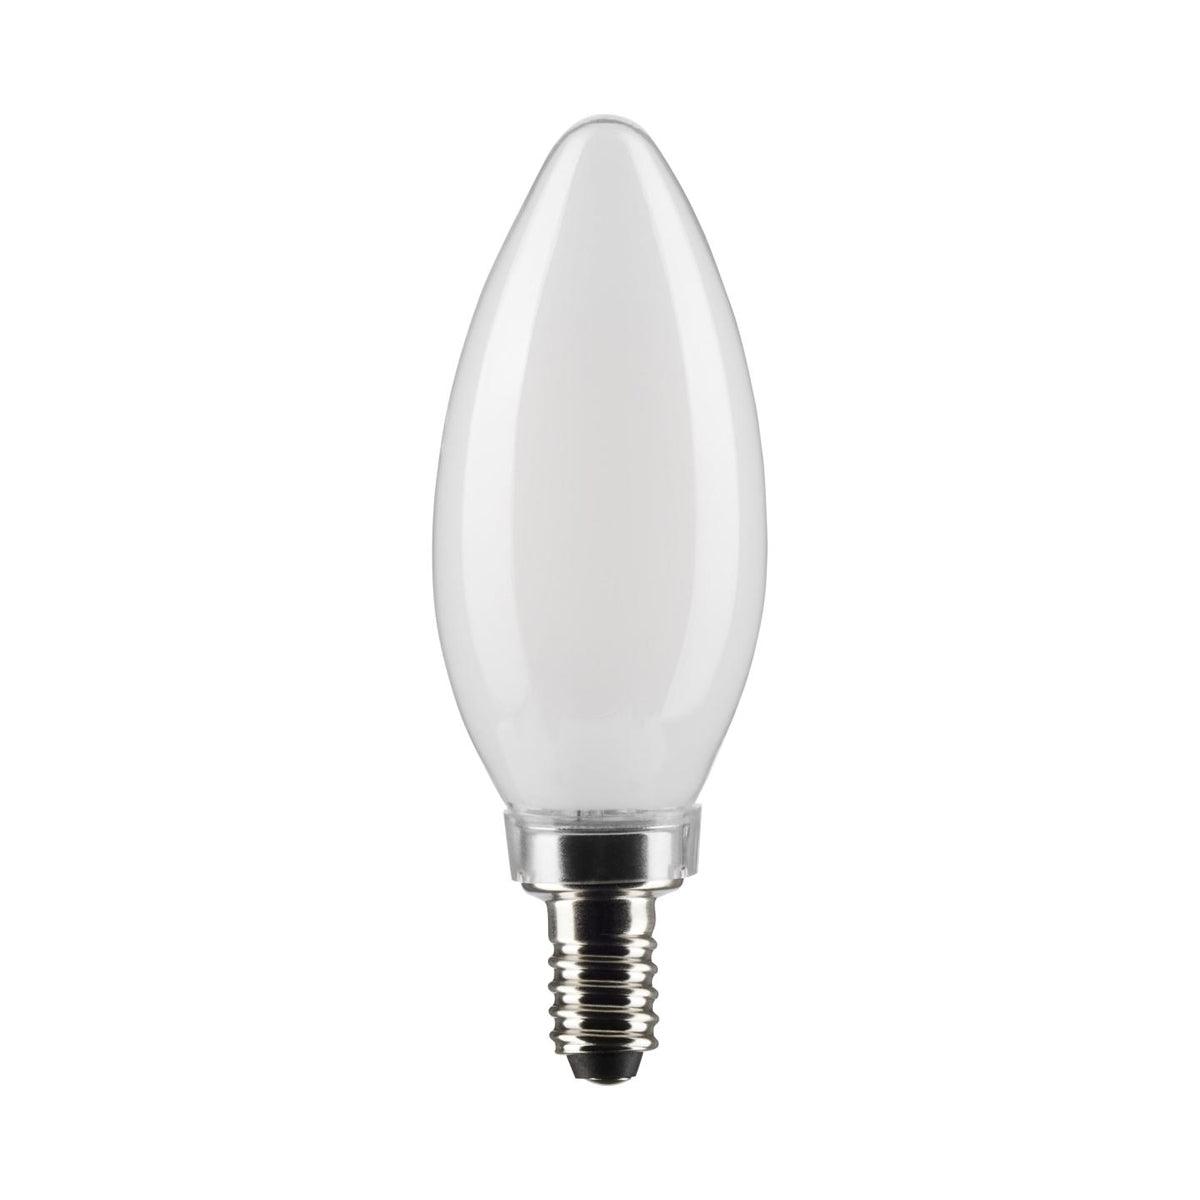 B11 Candle LED Bulb, 60W Equivalent,6 Watt, 500 Lumens, 2700K, E12 Candelabra Base, Frosted Finish, Pack Of 2 - Bees Lighting